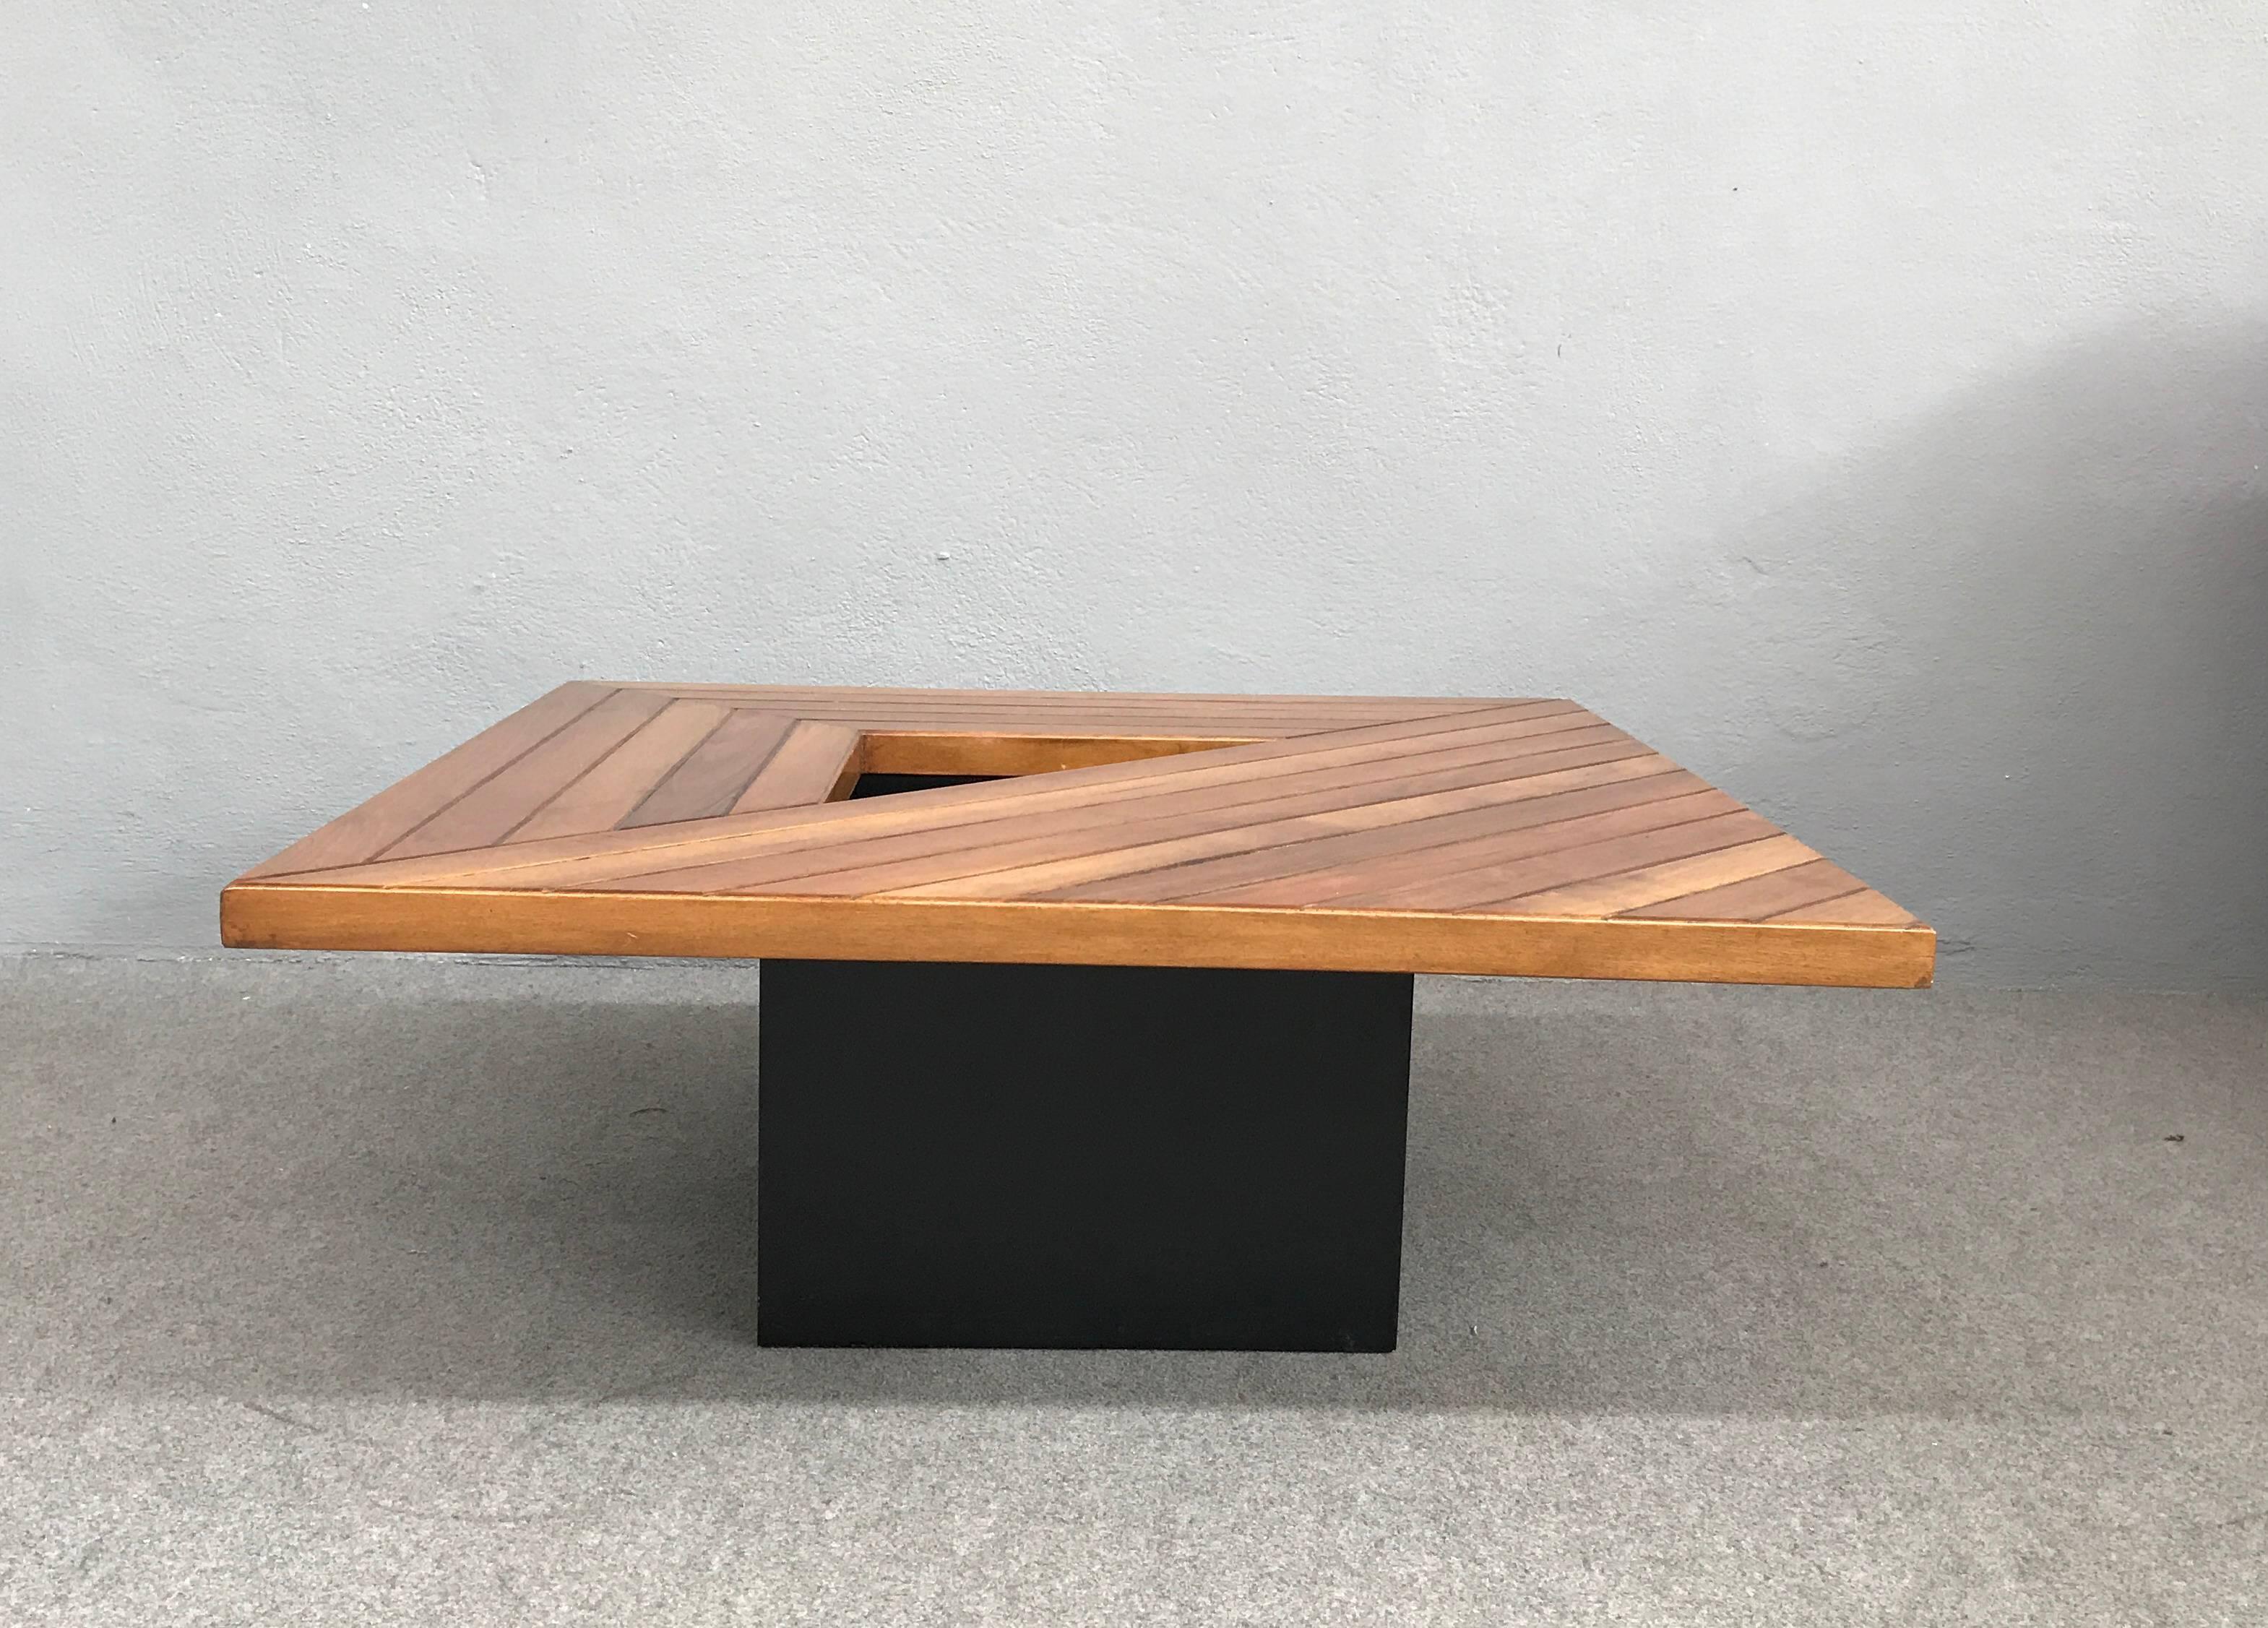 Squared wood coffee table attributed to Cassina.